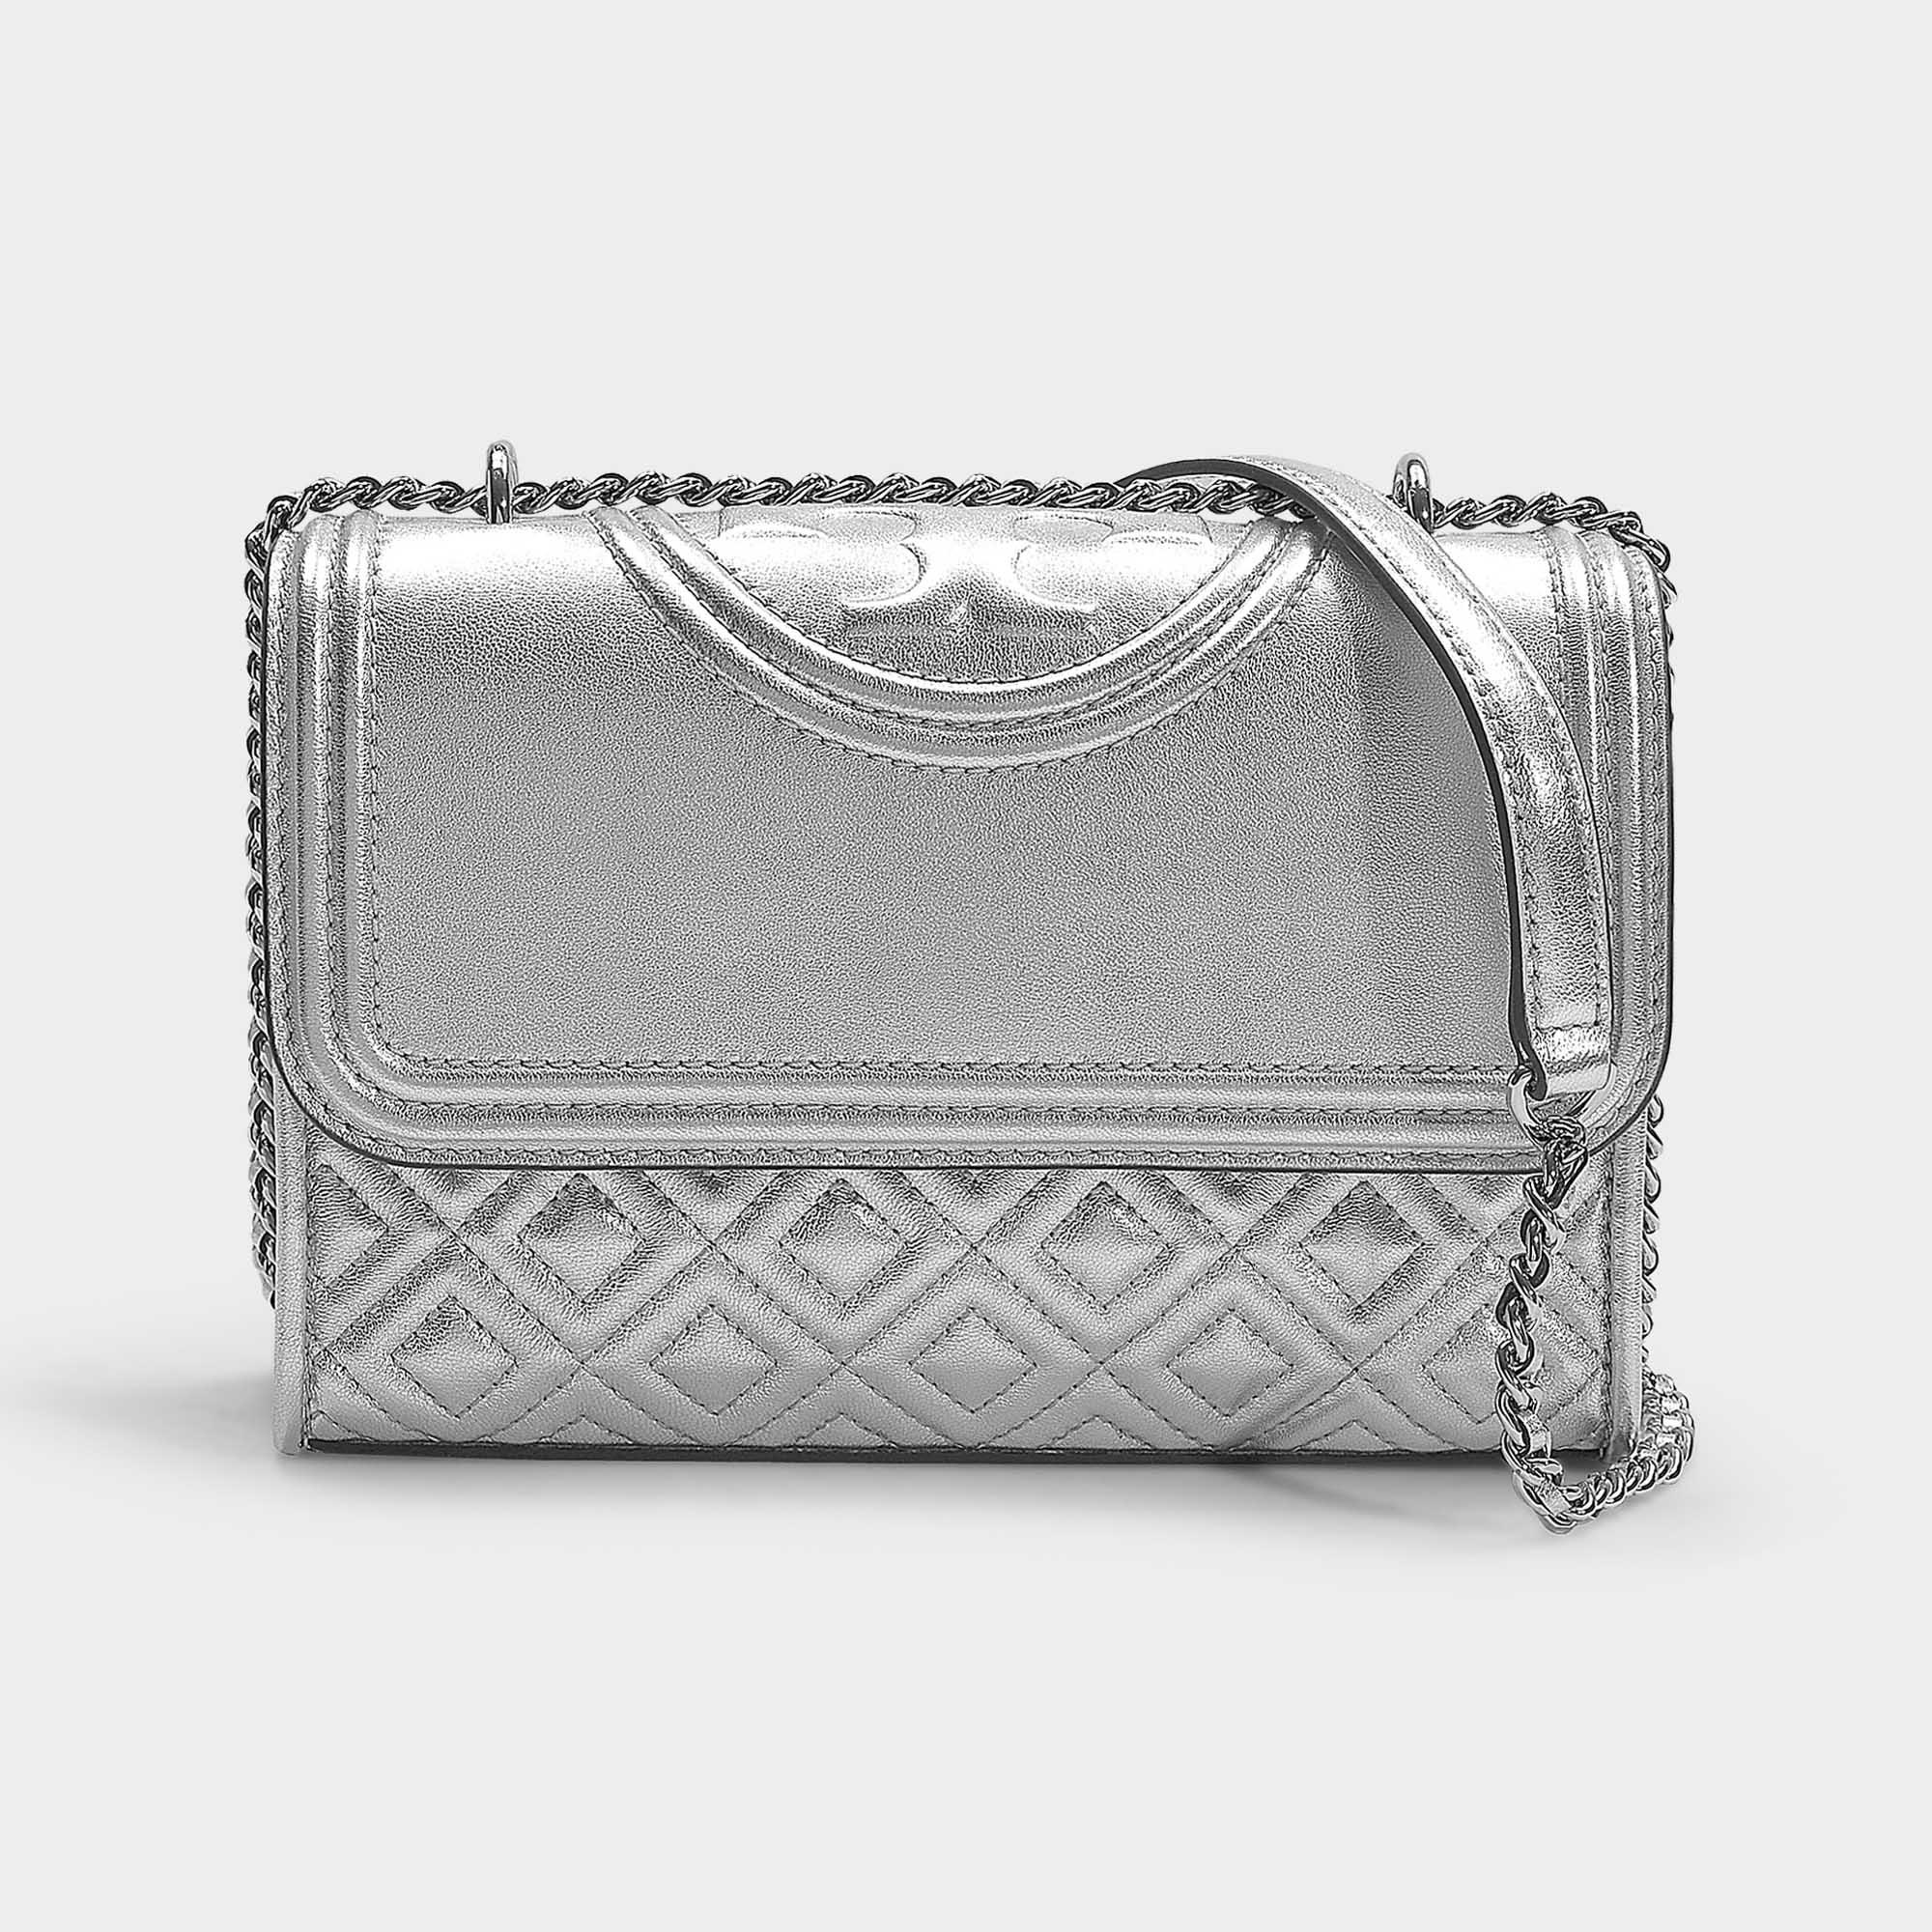 Tory Burch Leather Fleming Metallic Small Convertible Shoulder Bag ...